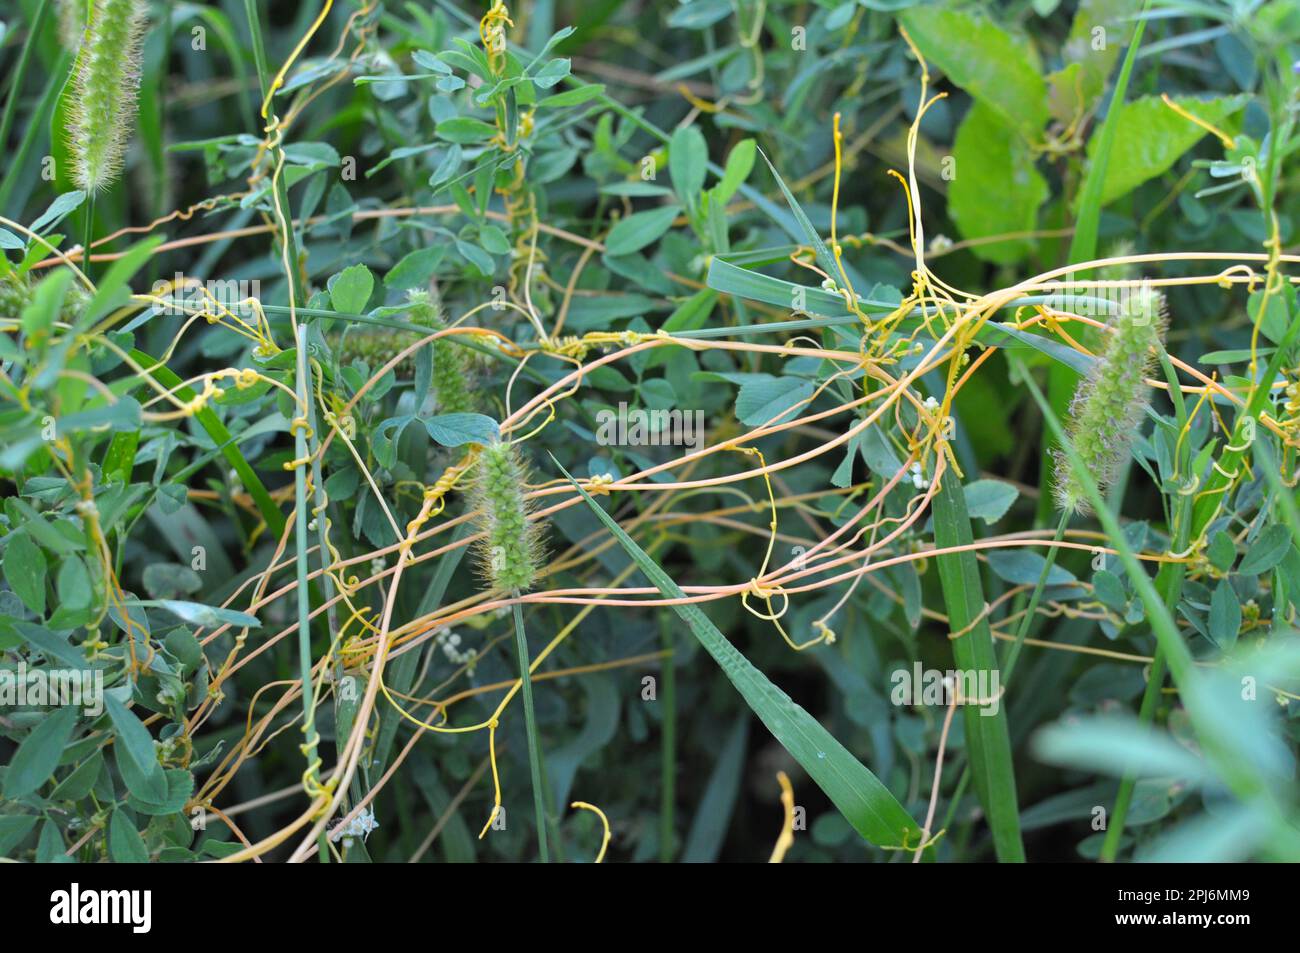 The parasitic plant cuscuta grows in the field among crops Stock Photo